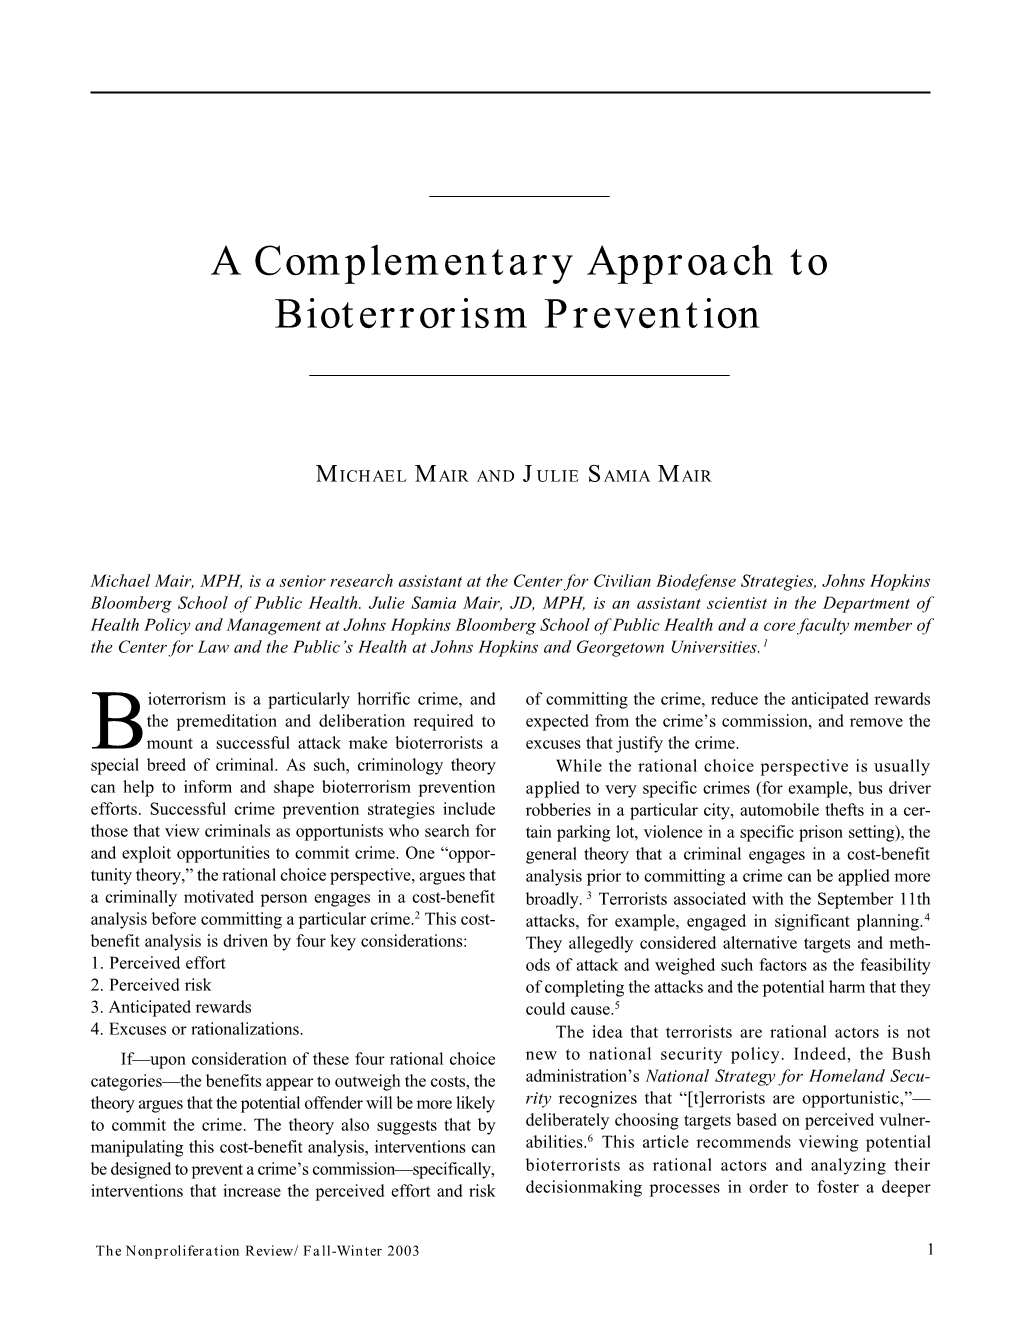 NPR10.3: a Complementary Approach to Bioterrorism Prevention